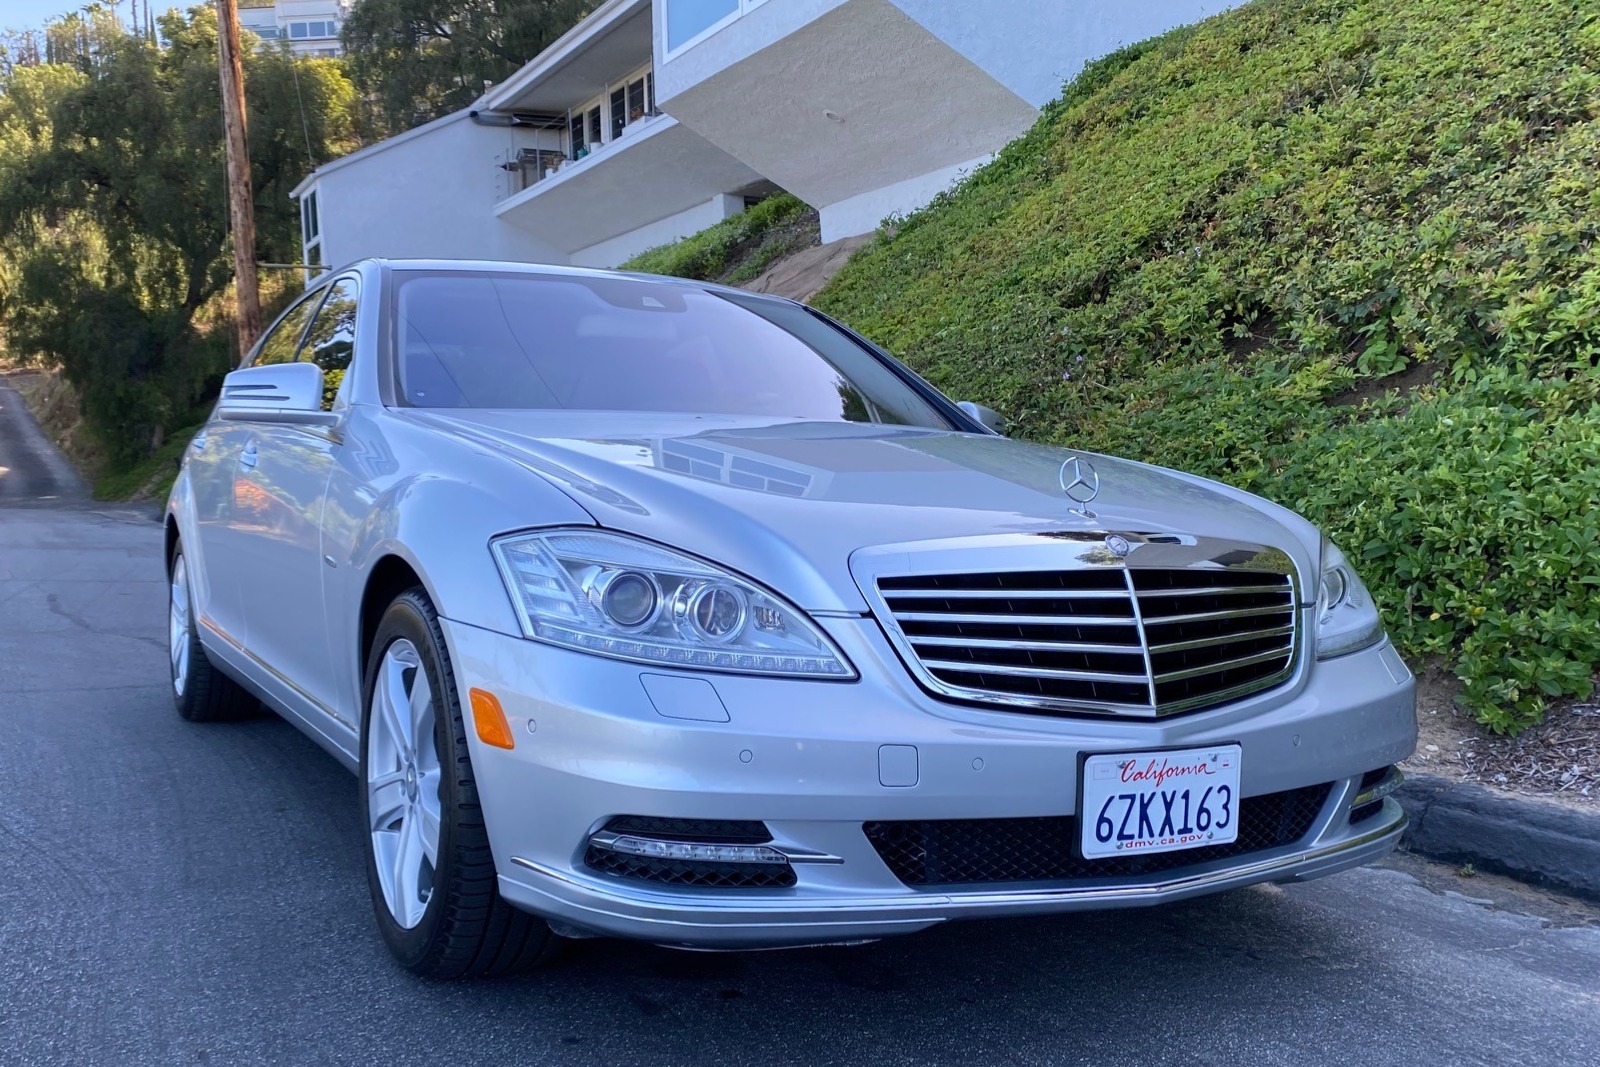 Used 35k-Mile 2012 Mercedes-Benz S550 Review